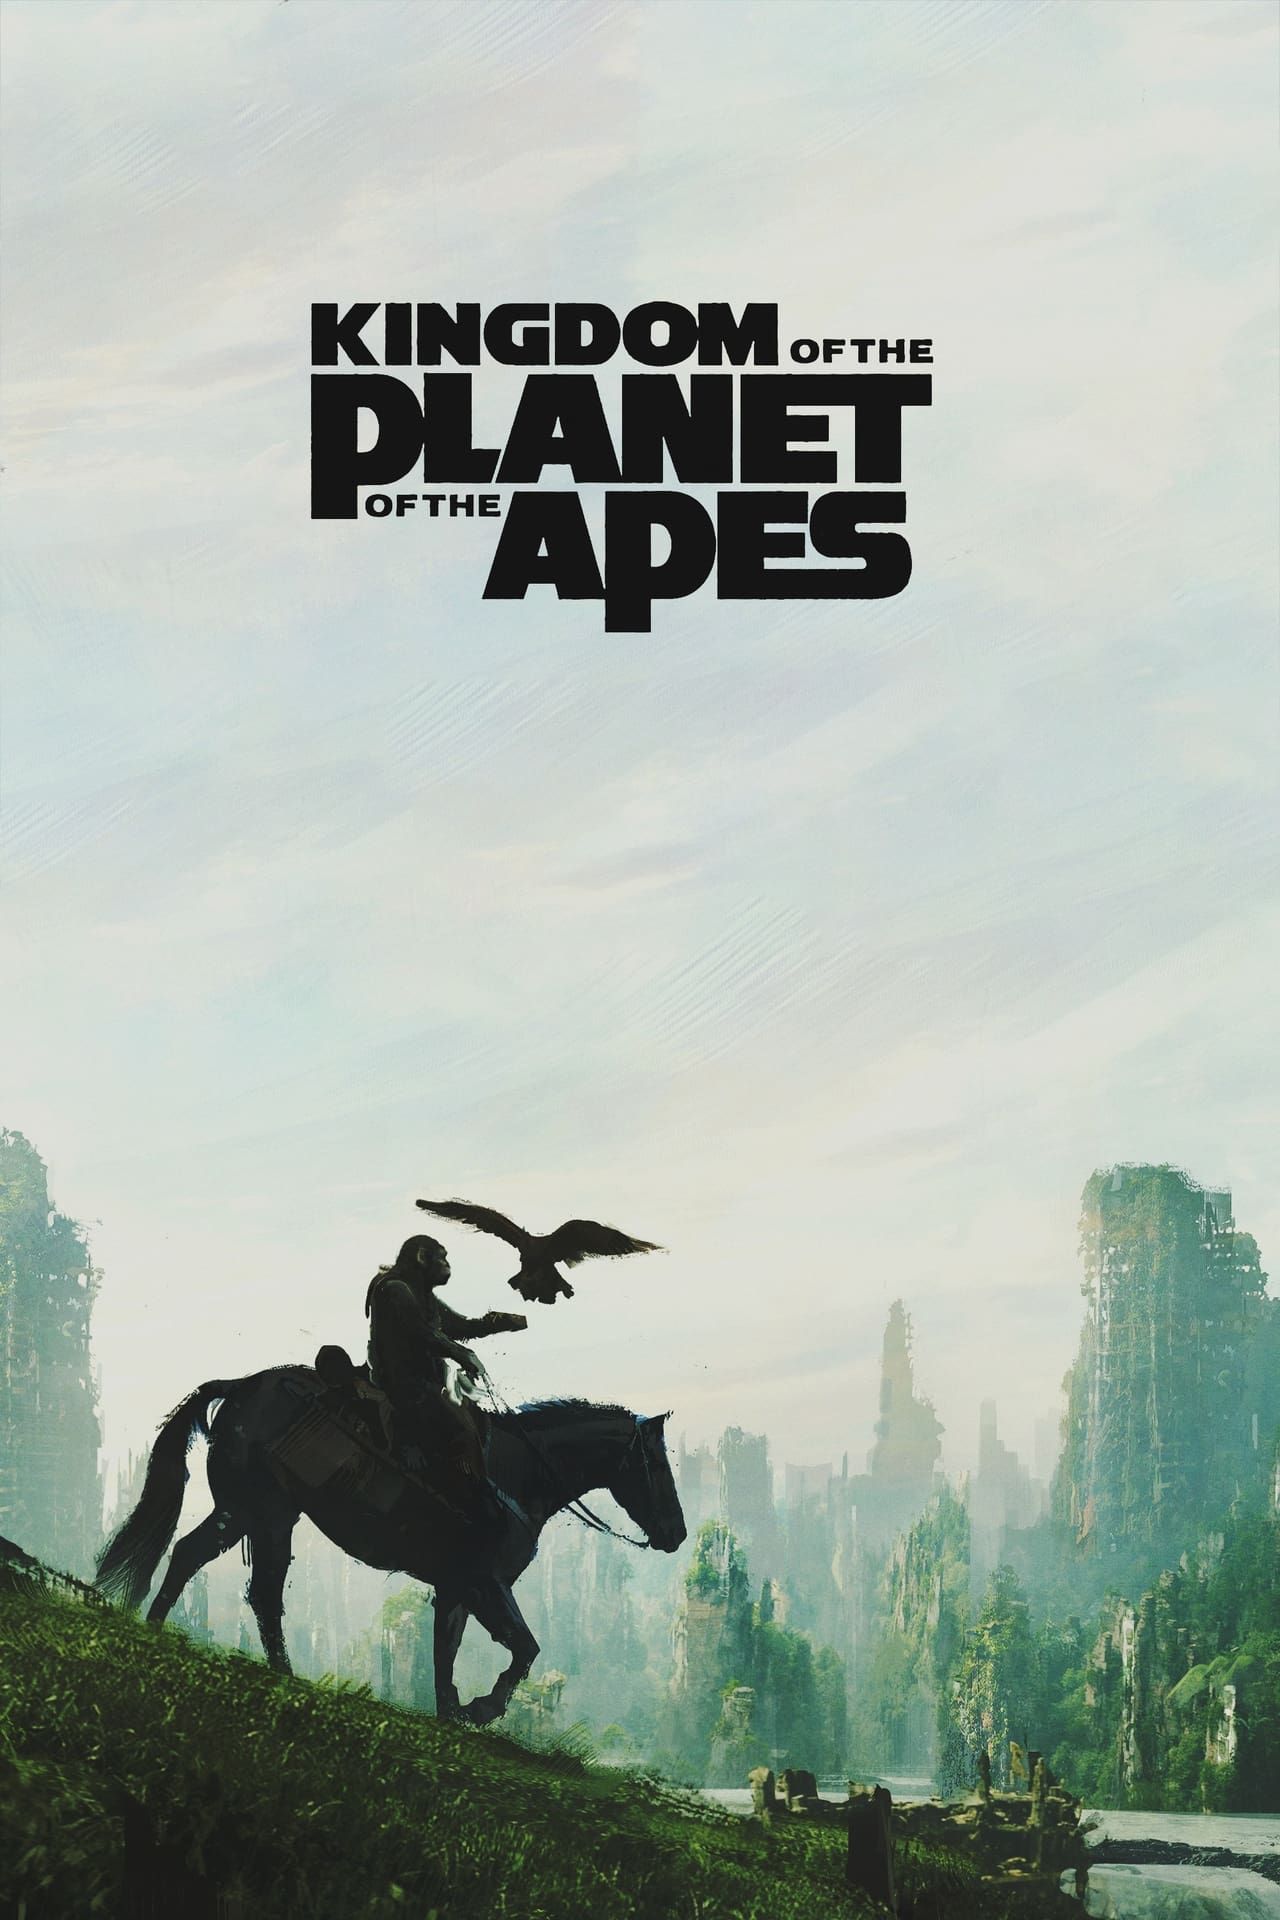 Kingdom of the Planet of the Apes Film Poster